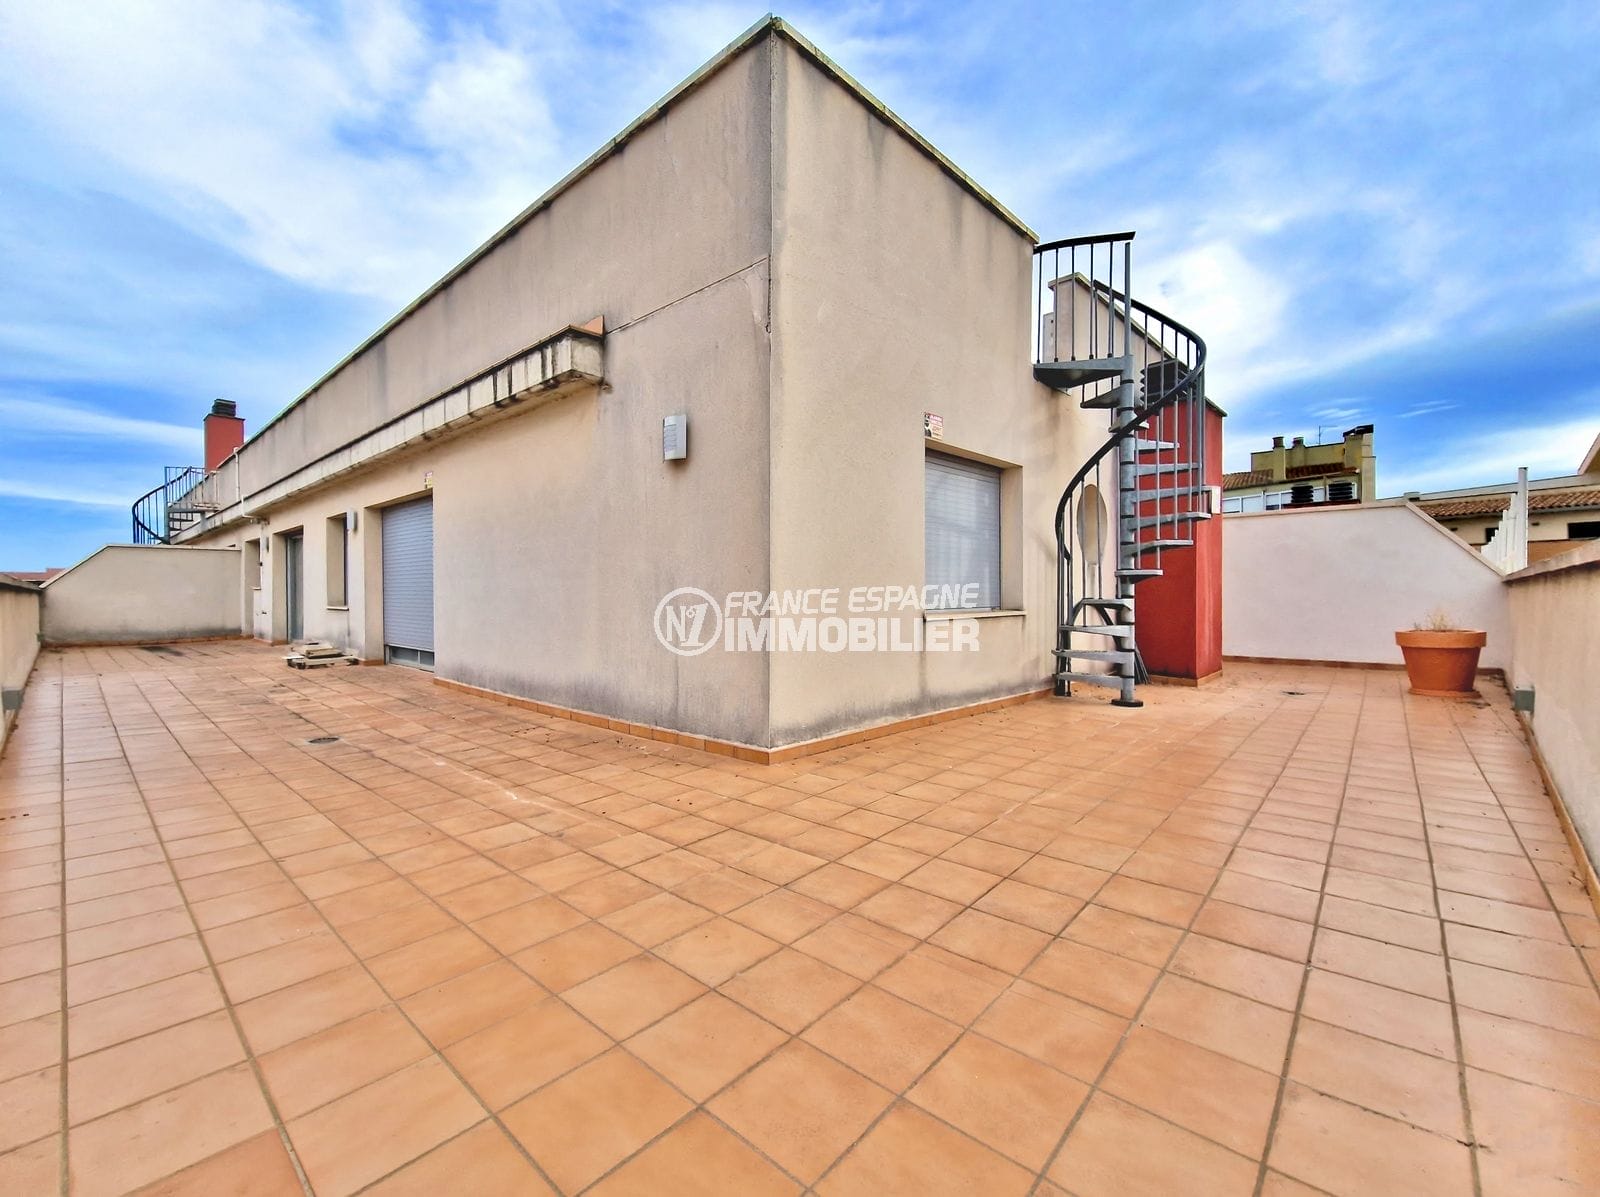 Figueres - atico 3 bedrooms terrace 77 m², private parking cellar